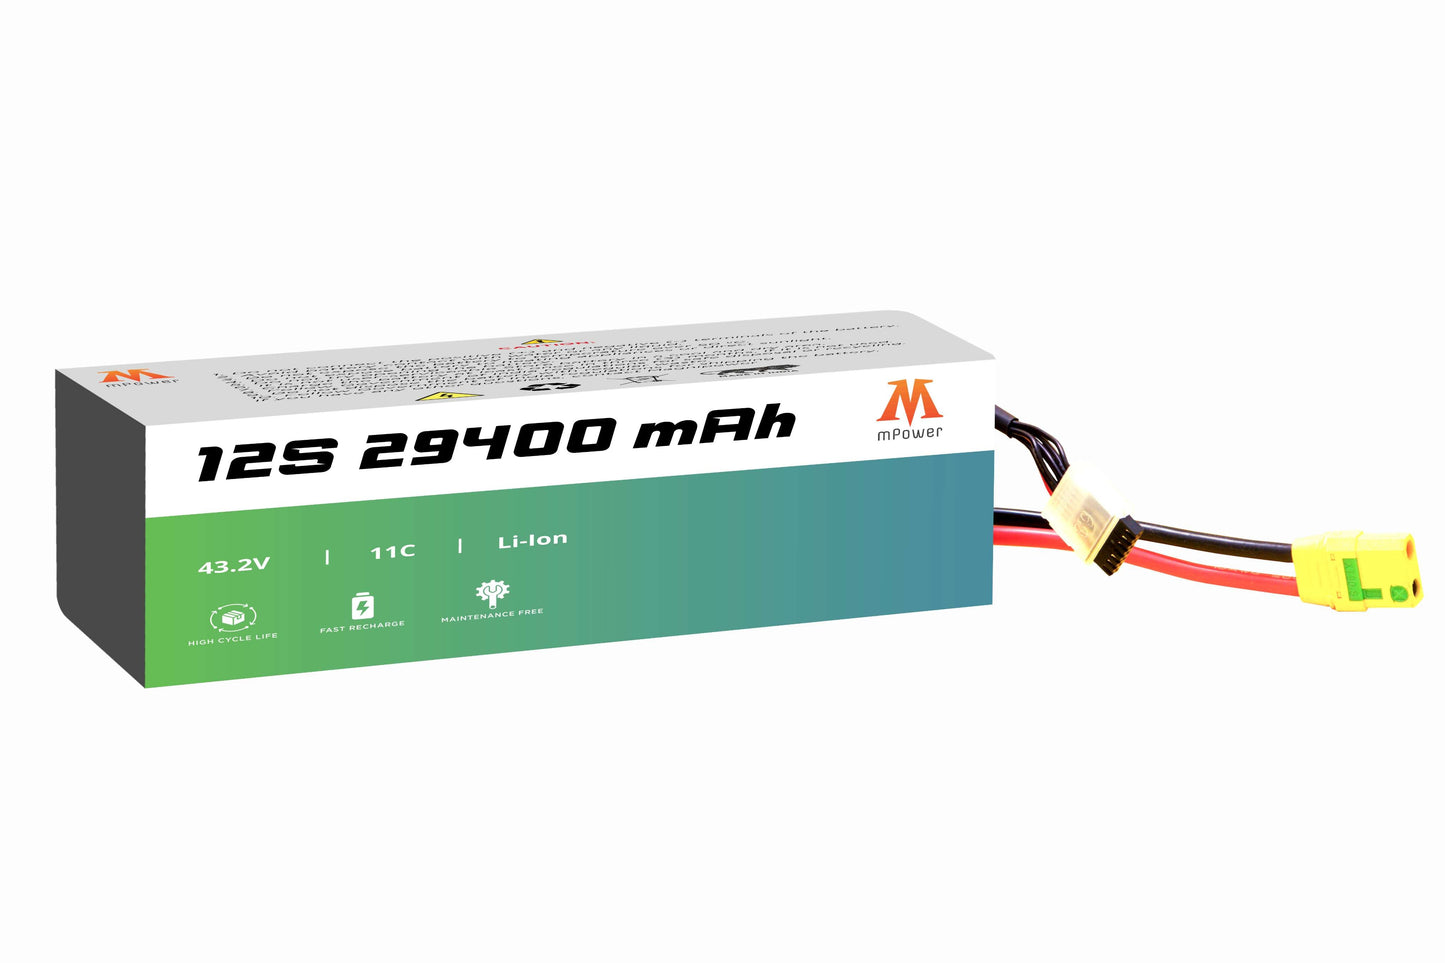 mPower 12S 29400mAh Lithium-Ion Battery for Agricultural Spraying Drones